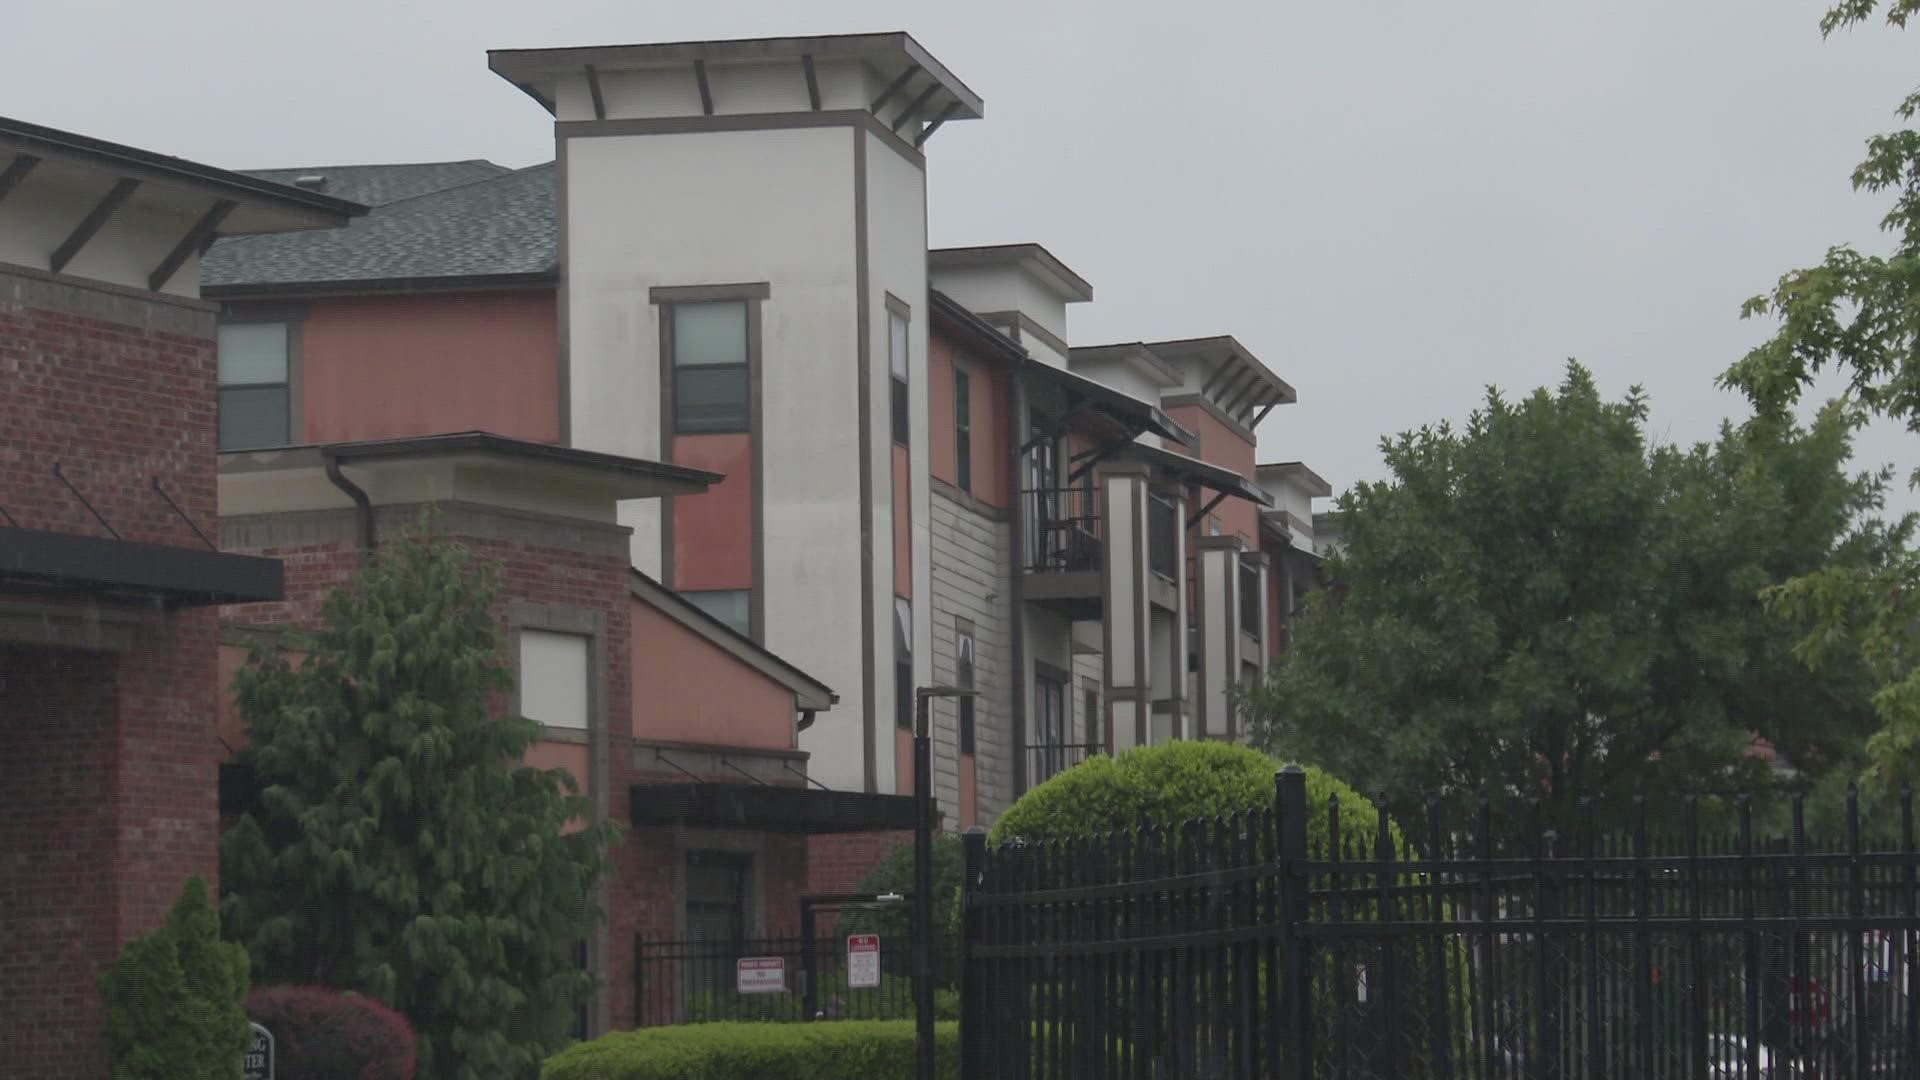 In a court hearing, attorney Danny Matlock urged the judge to grant his request to block this lease cancellation by Bellamy Louisville apartments.